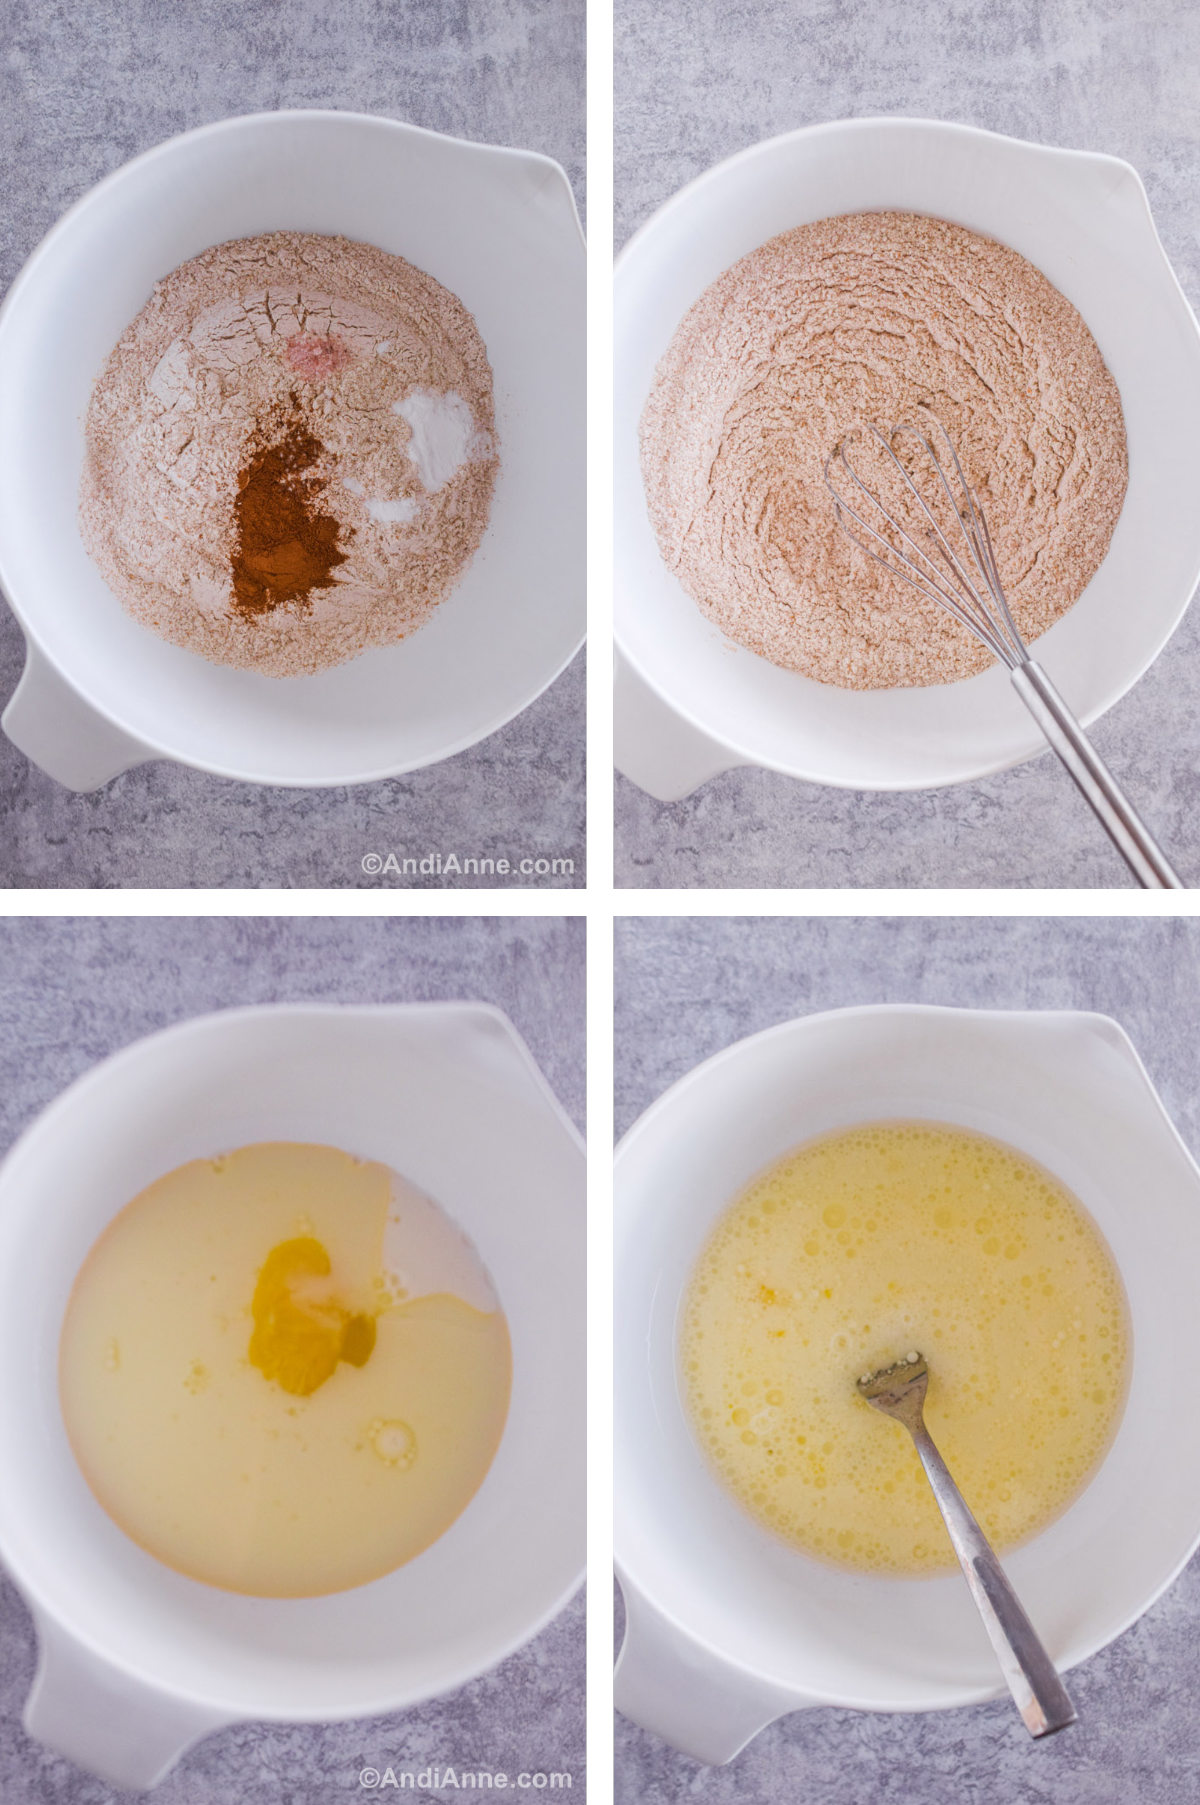 Four overhead images in one: 1. Dry ingredients in a white bowl. 2. Dry ingredients mixed. 3. Wet ingredients in a bowl. 4. Wet ingredients mixed. 